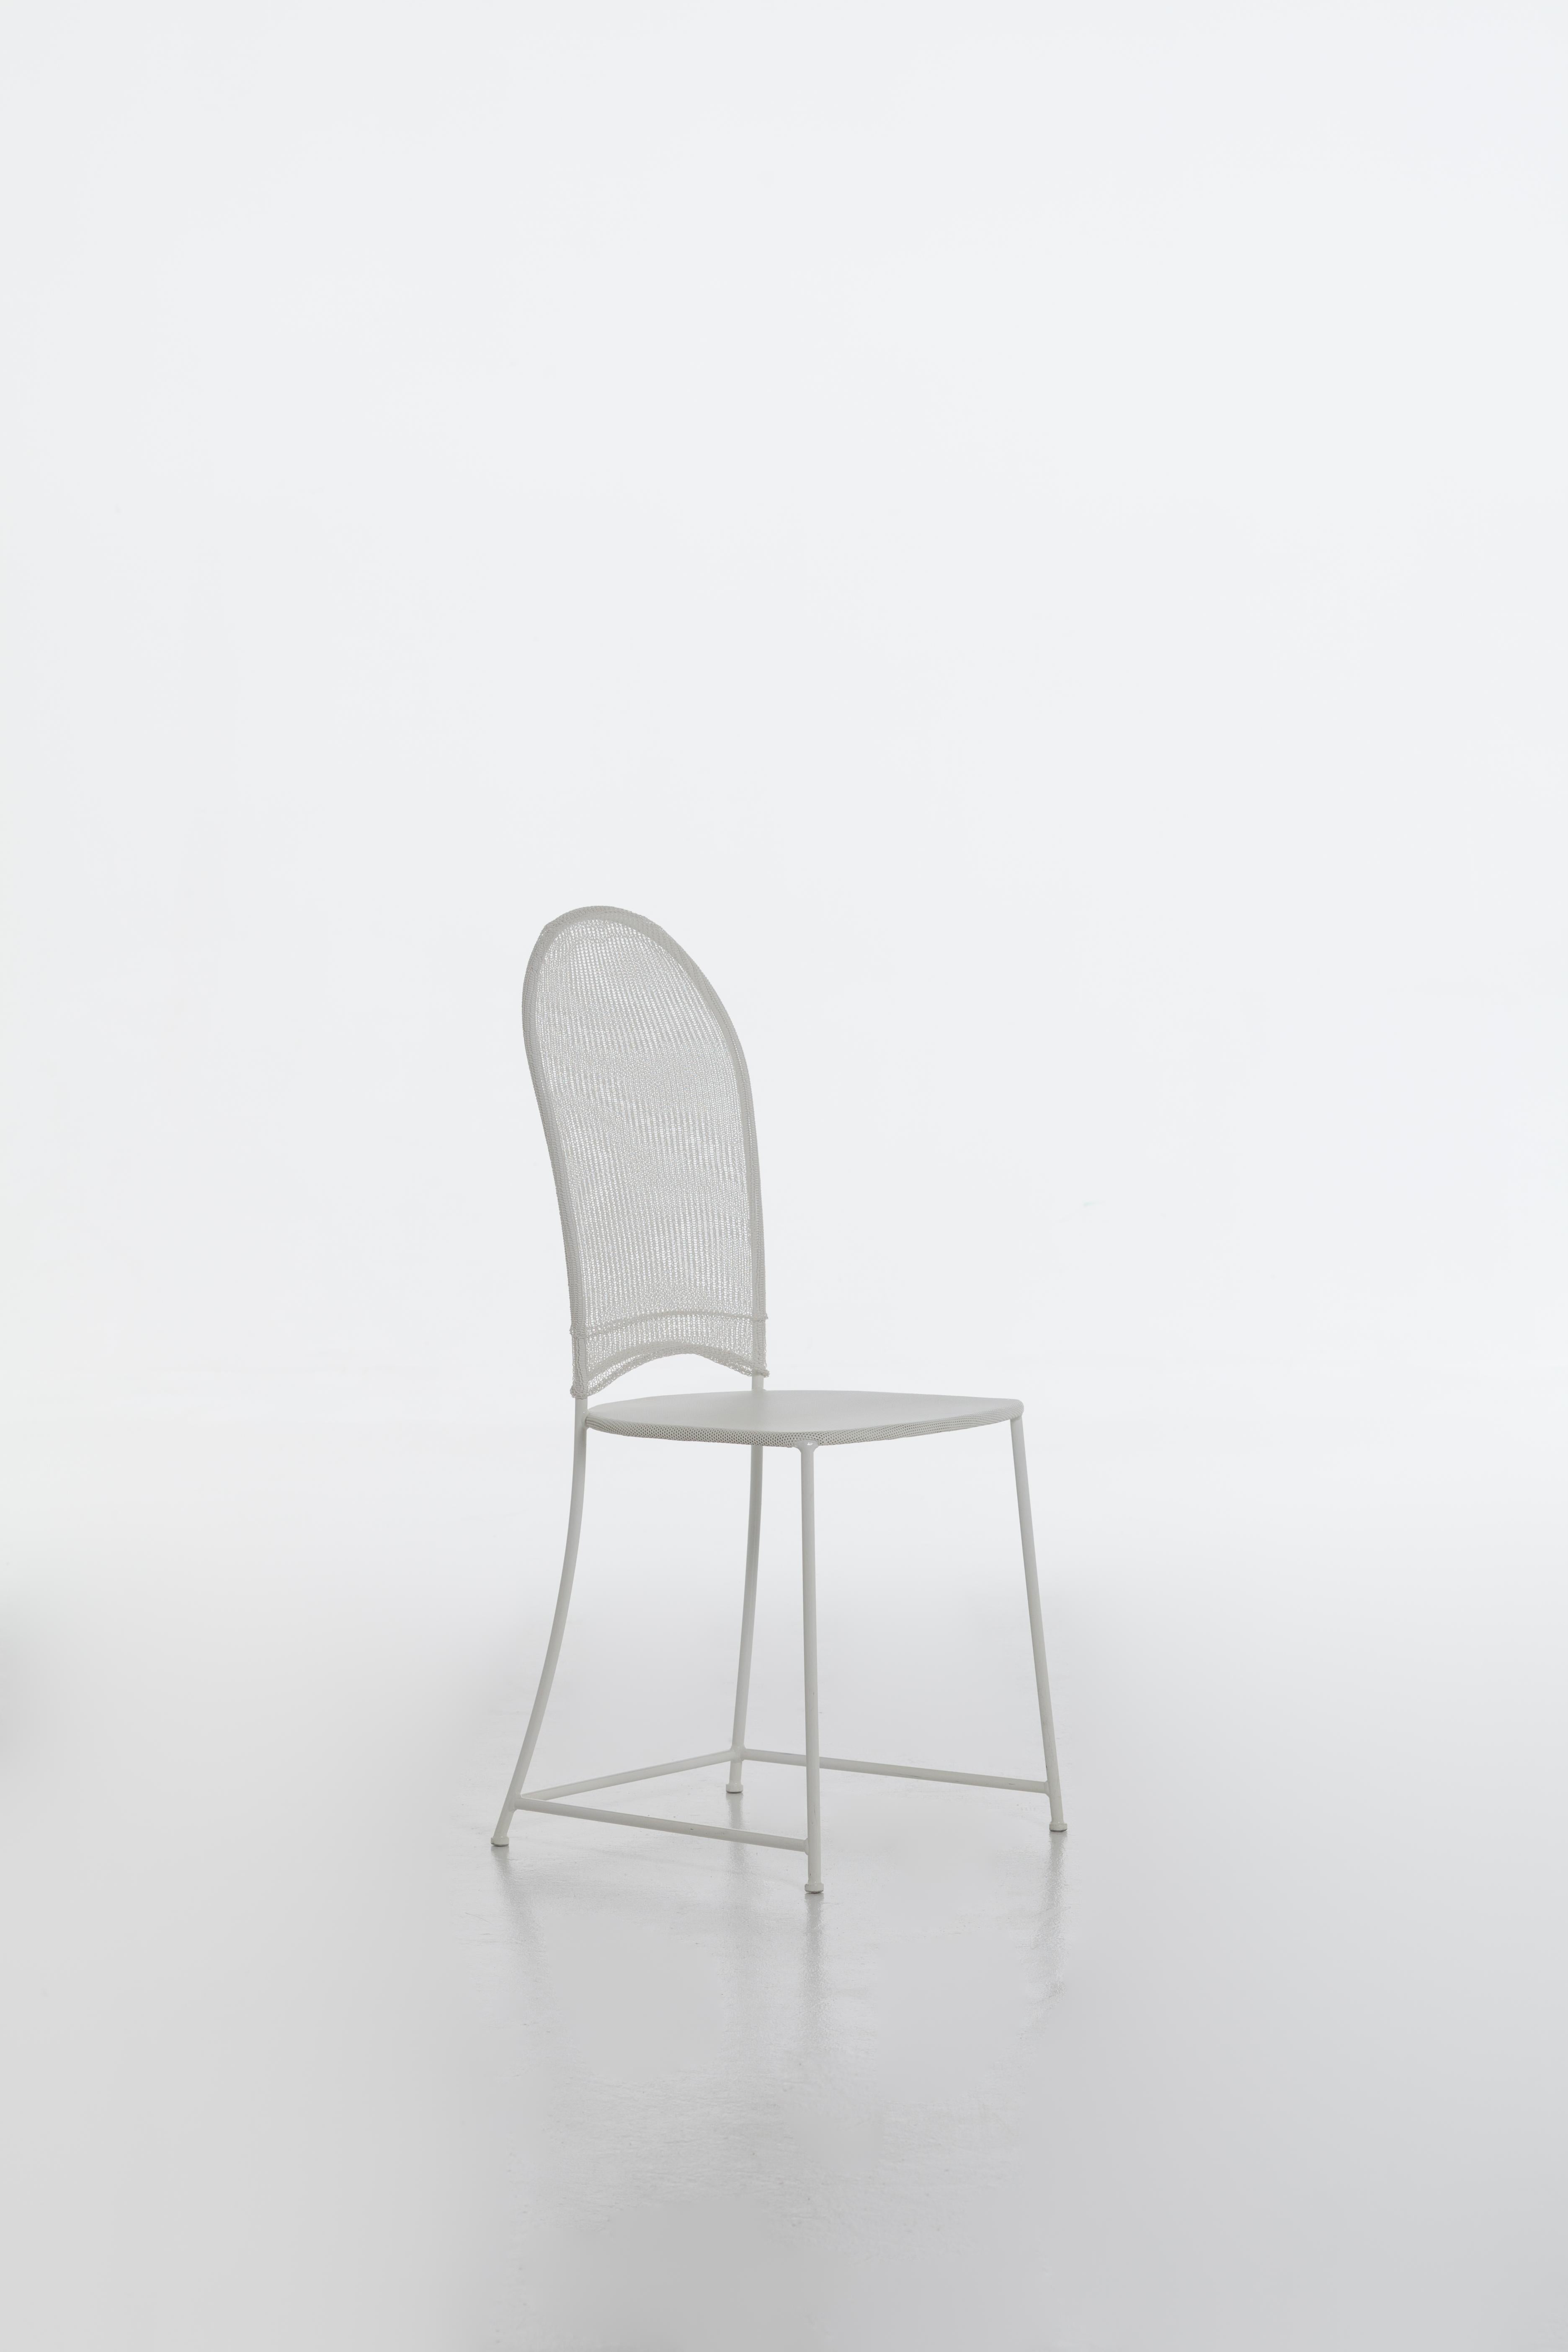 Essential chair, Inout 873 is characterised by a minimal structure made in white or grey painted steel. The seat is made of micro-perforated steel sheet metal, while the rounded backrest is upholstered in removable mesh in white or grey heat-sealed